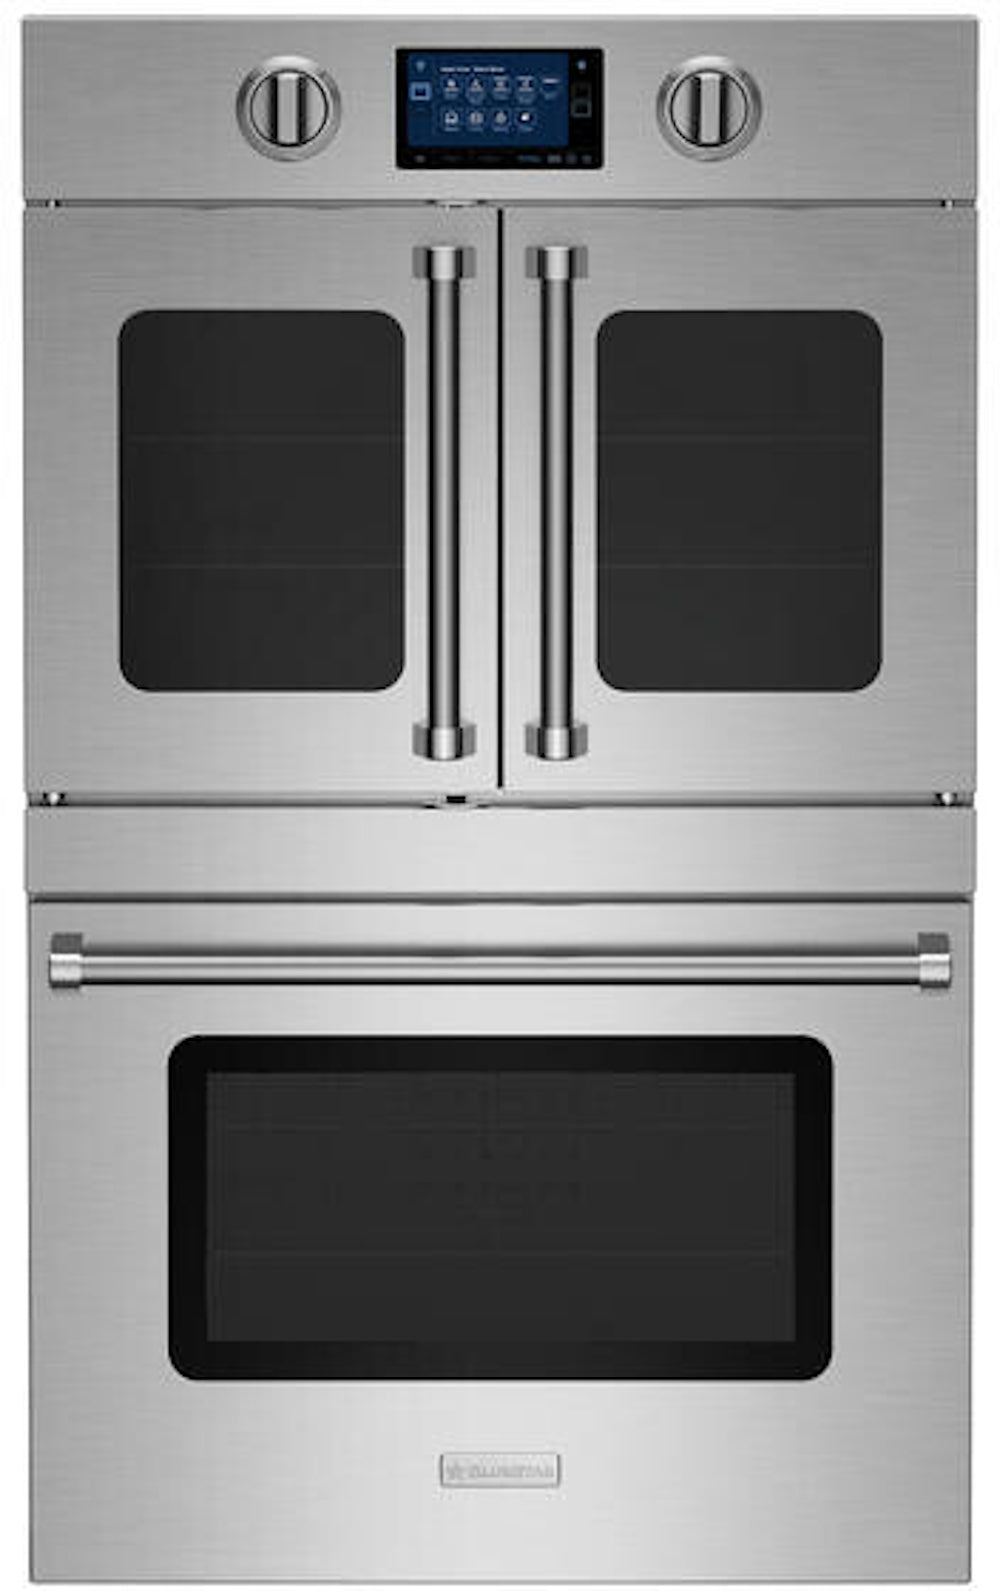 Bluestar - 8.2 cu. ft Double Wall Oven in Stainless - BSDEWO30SDV3